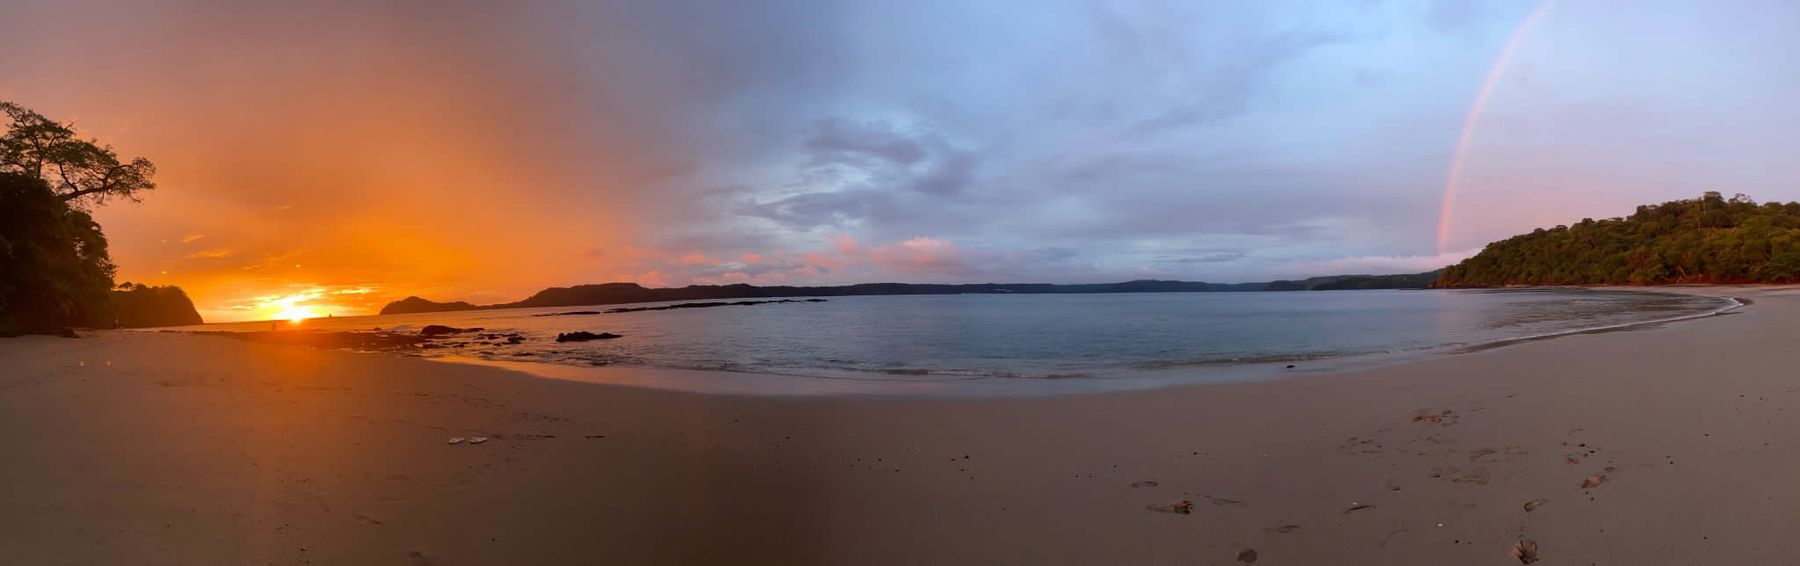 A panorama of a beach with an orange sunset on one side and a large rainbow on the other